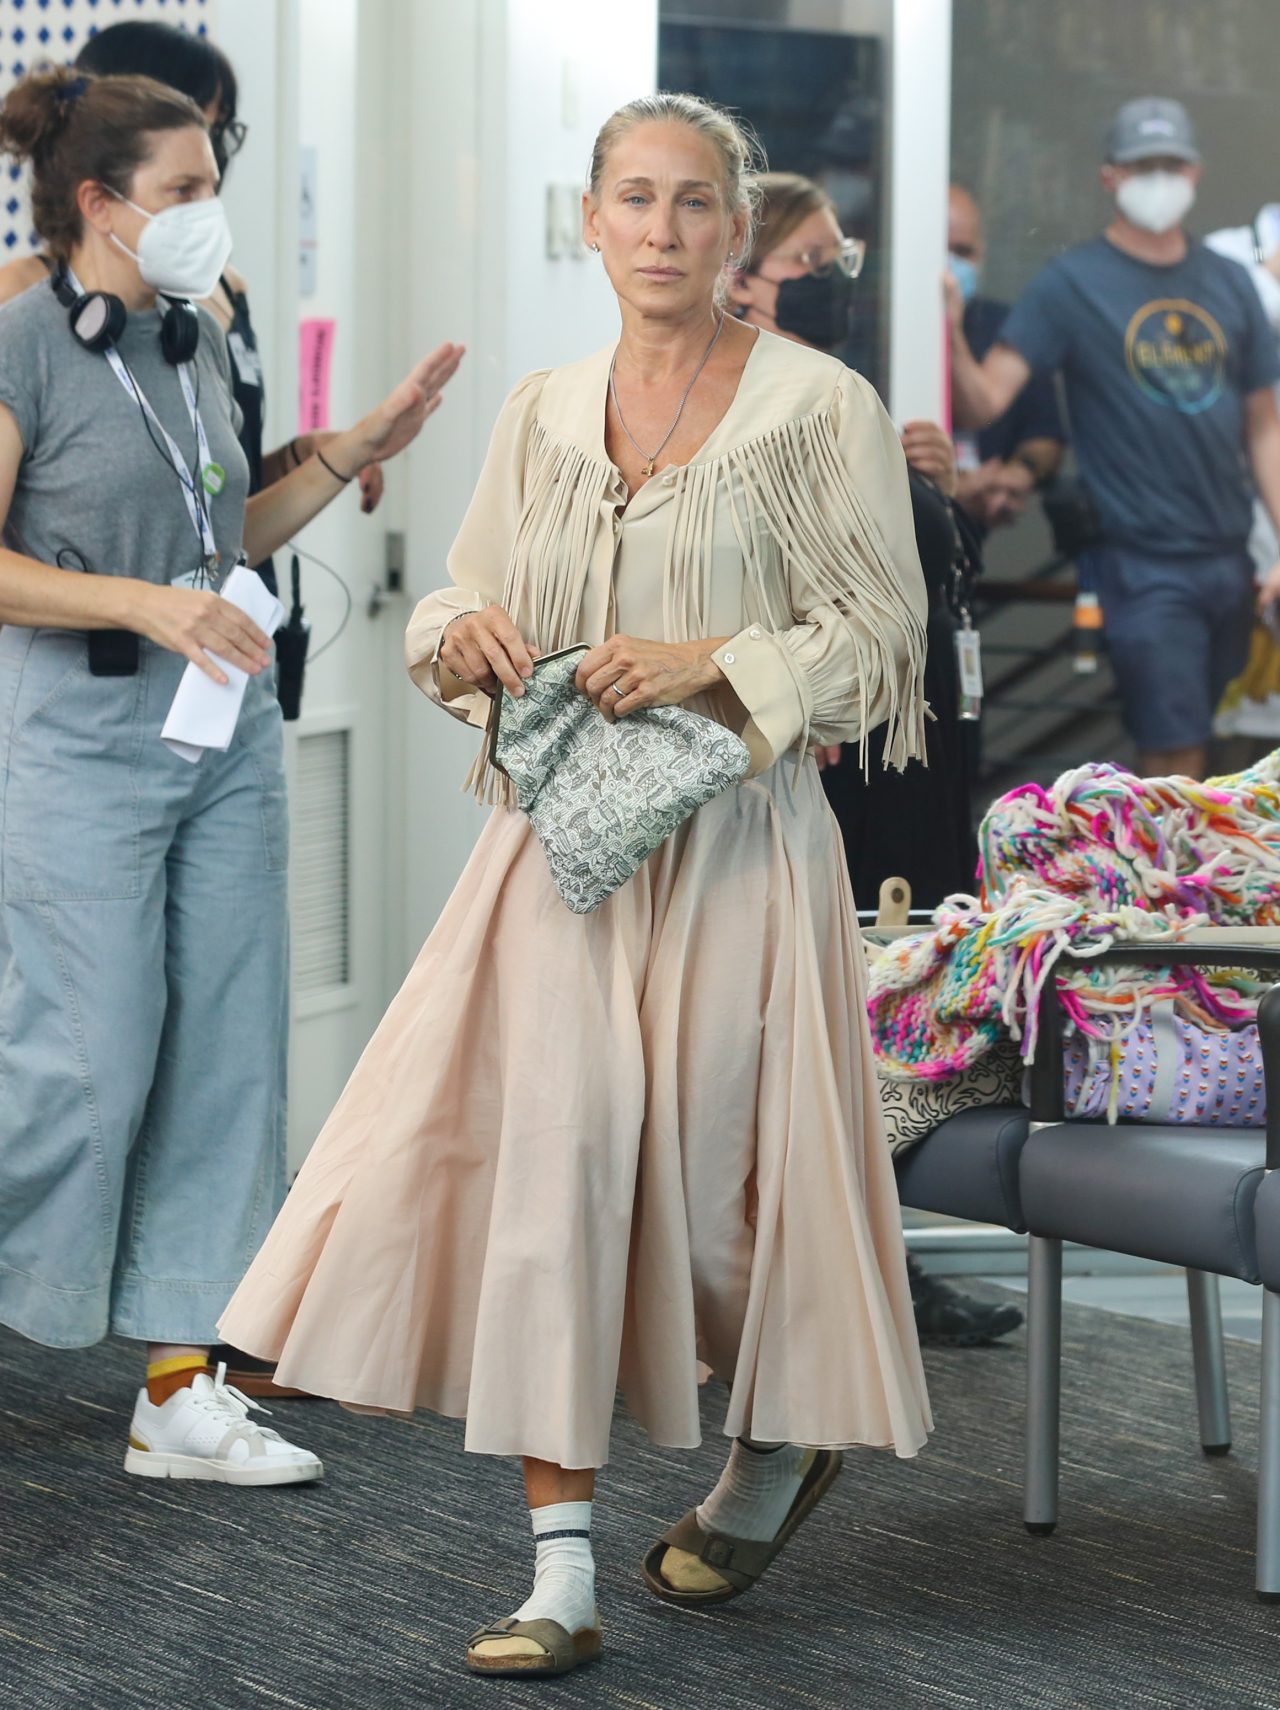 Sarah Jessica Parker filming <i>And Just Like That</i> with Carrie's Gabriela Hearst wrap